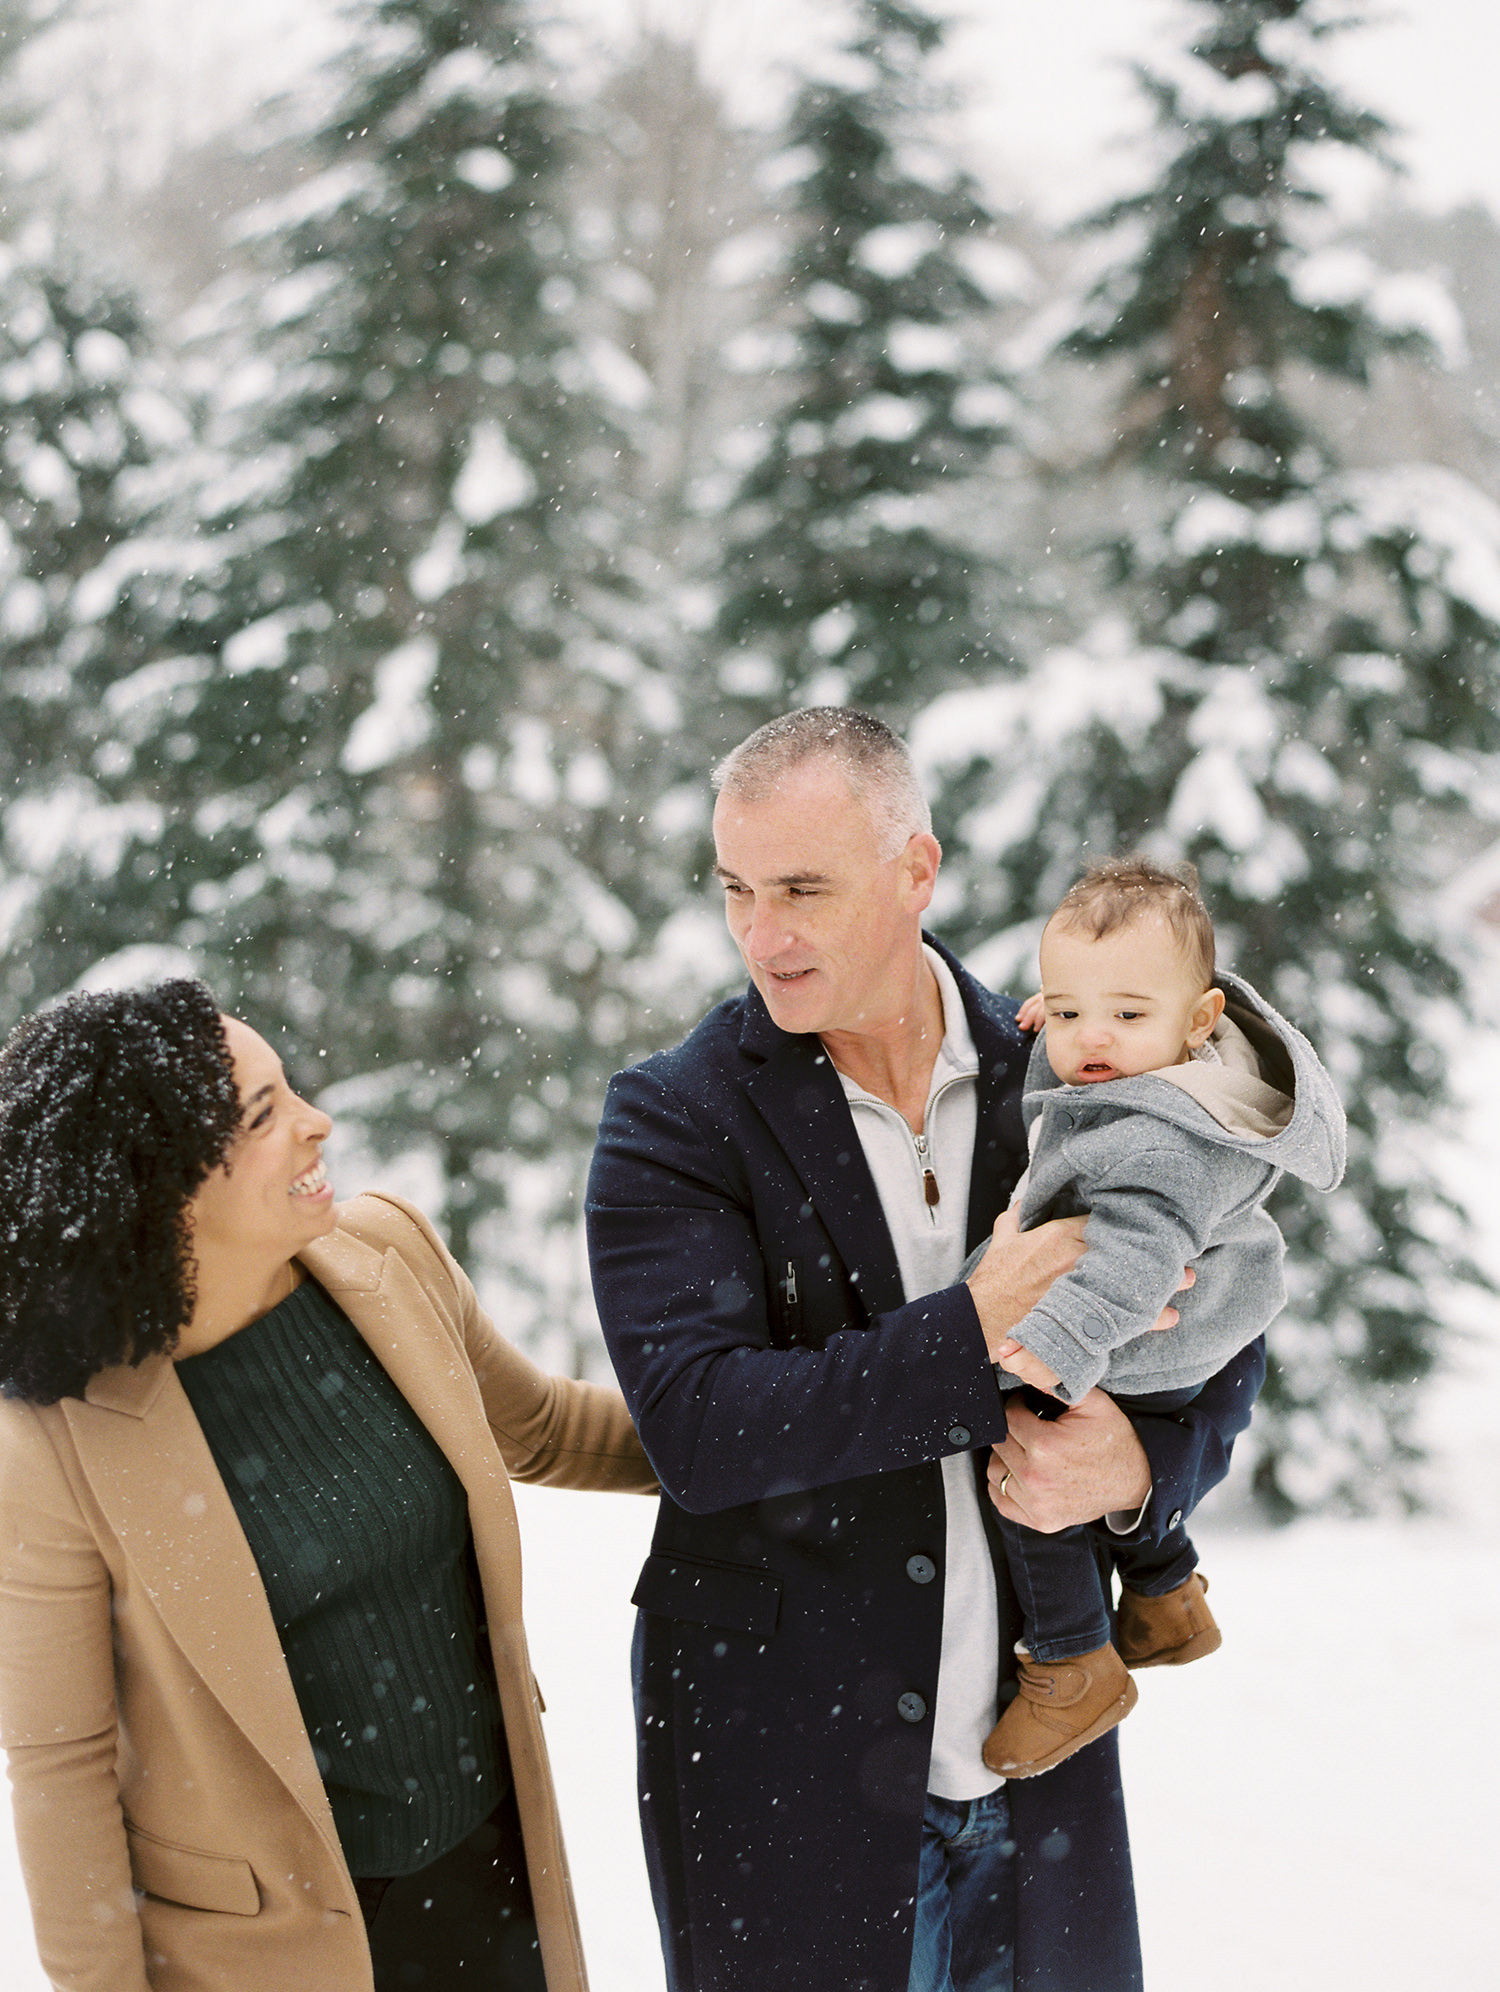 Winter family photo in snow with 1 year old. Lake Placid, New York by Adirondack Photographer Mary Dougherty